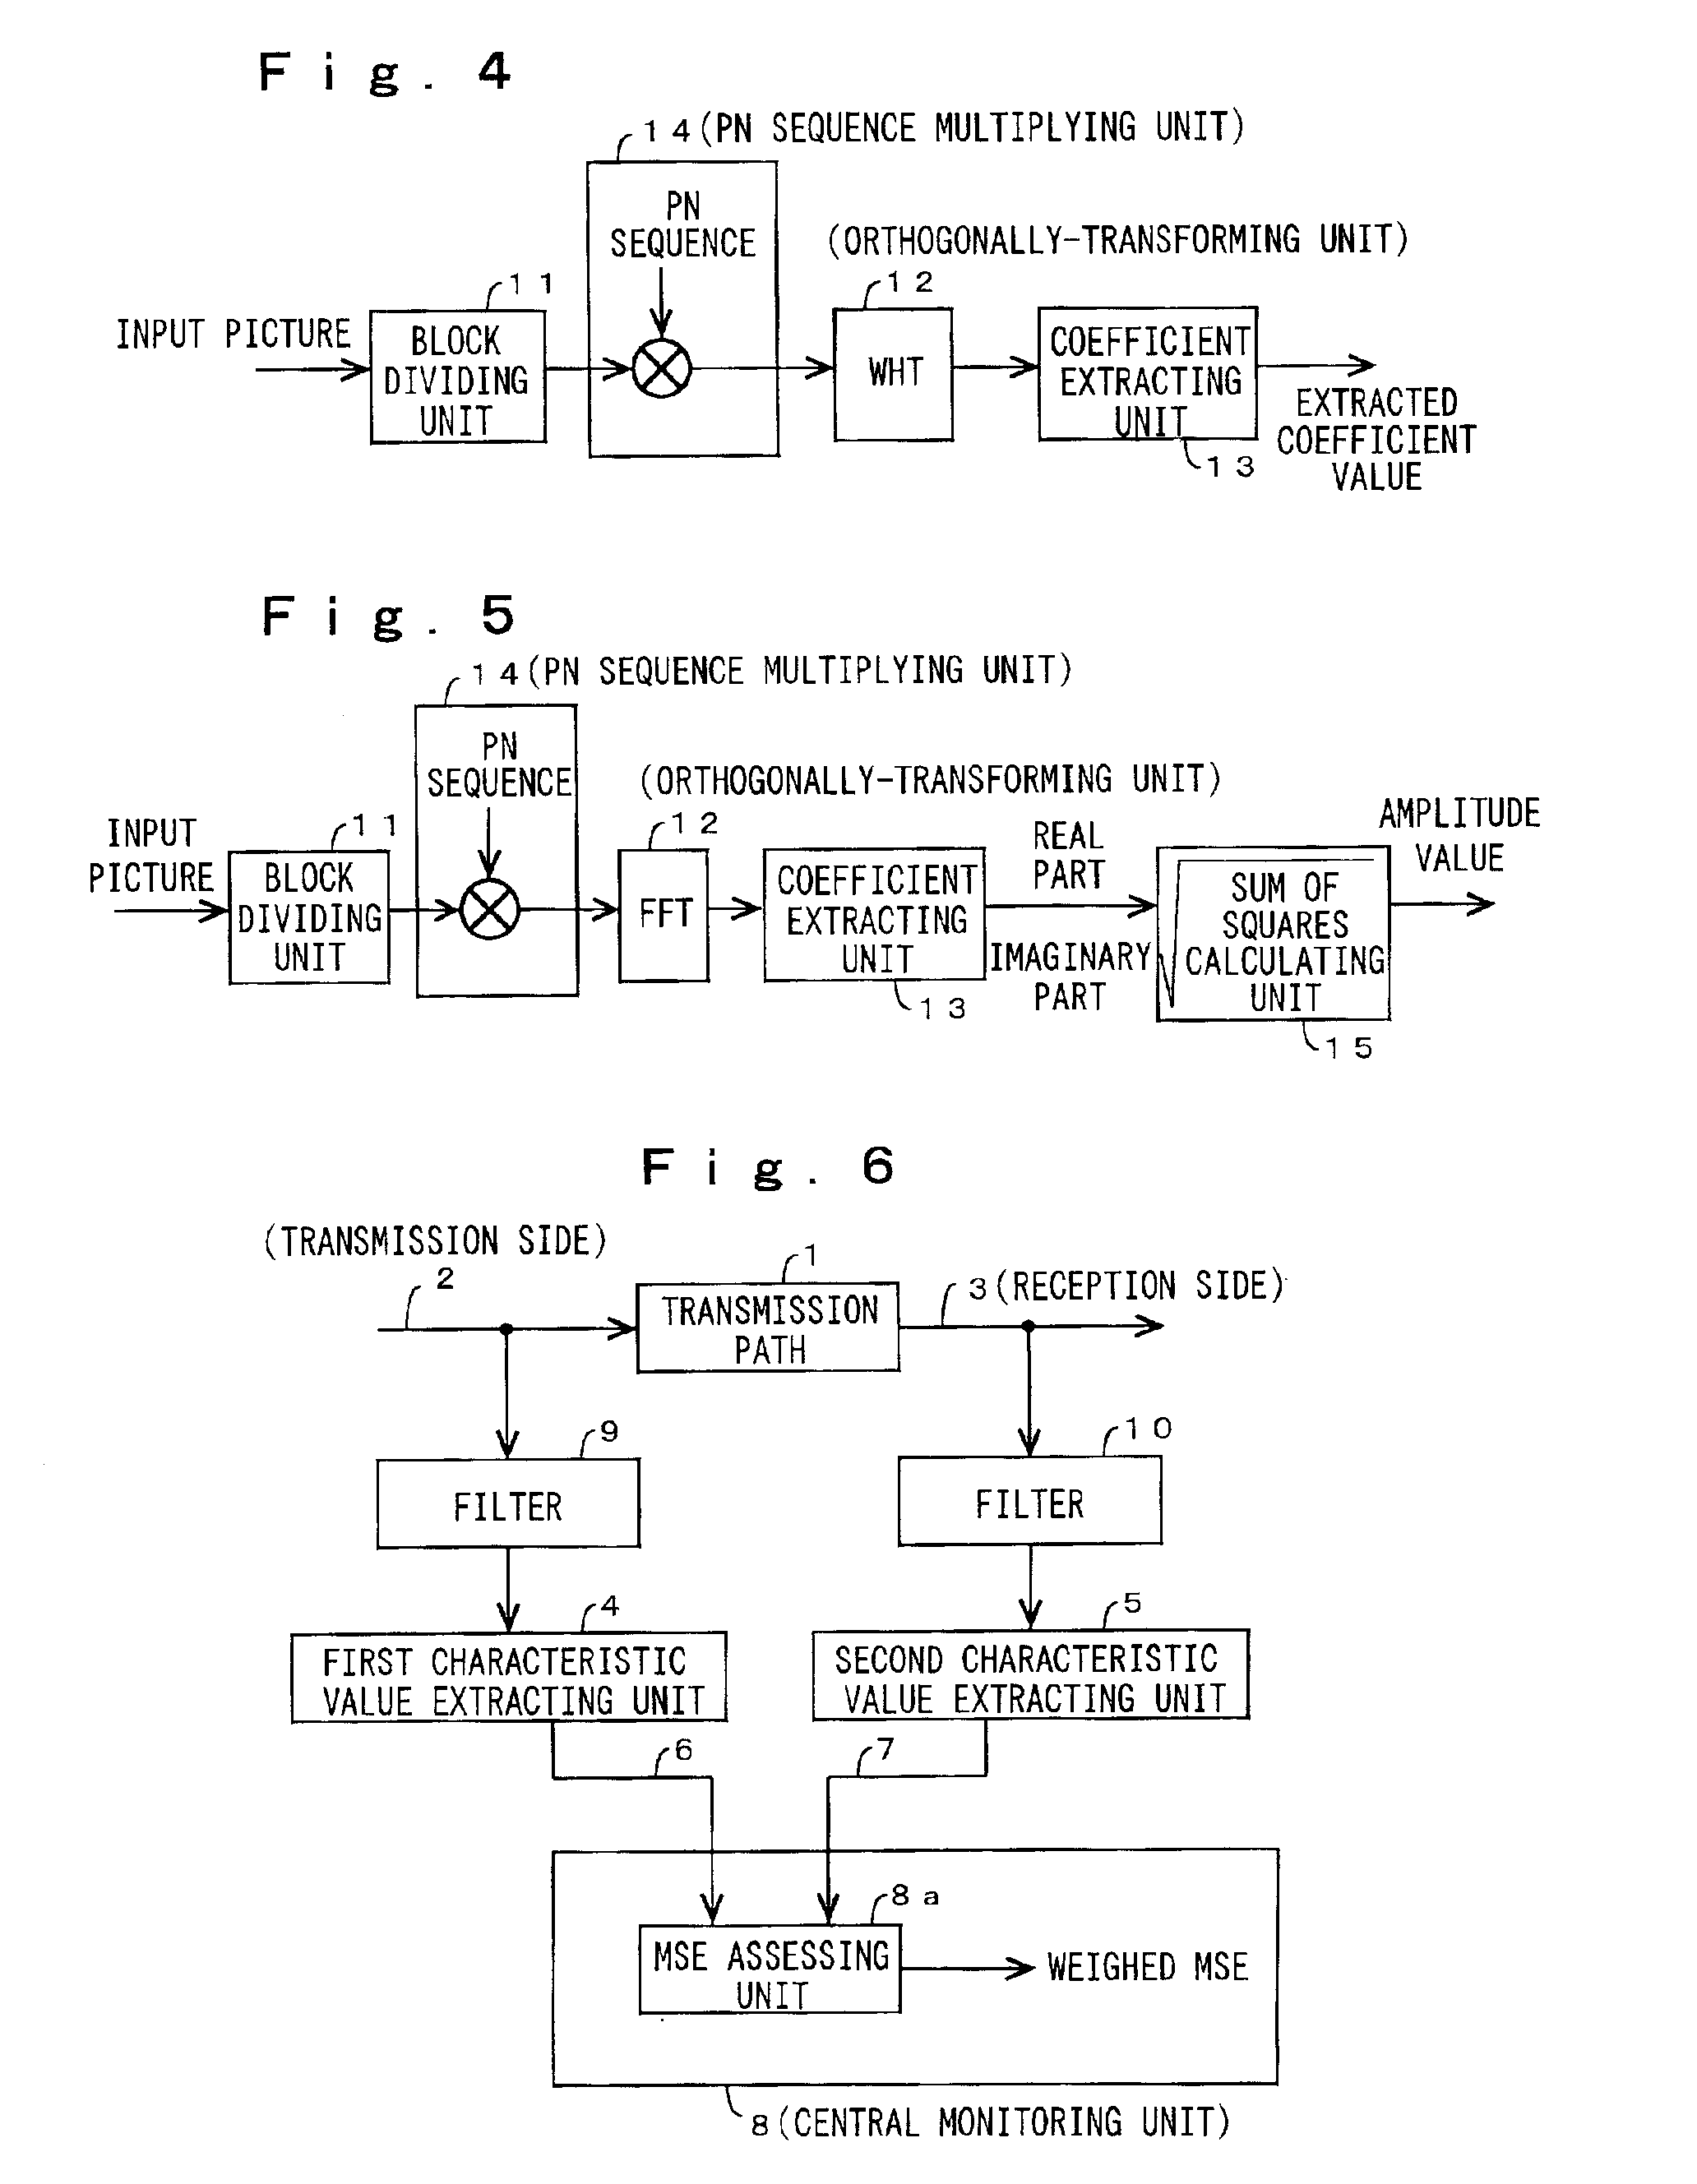 Apparatus for monitoring quality of picture in transmission